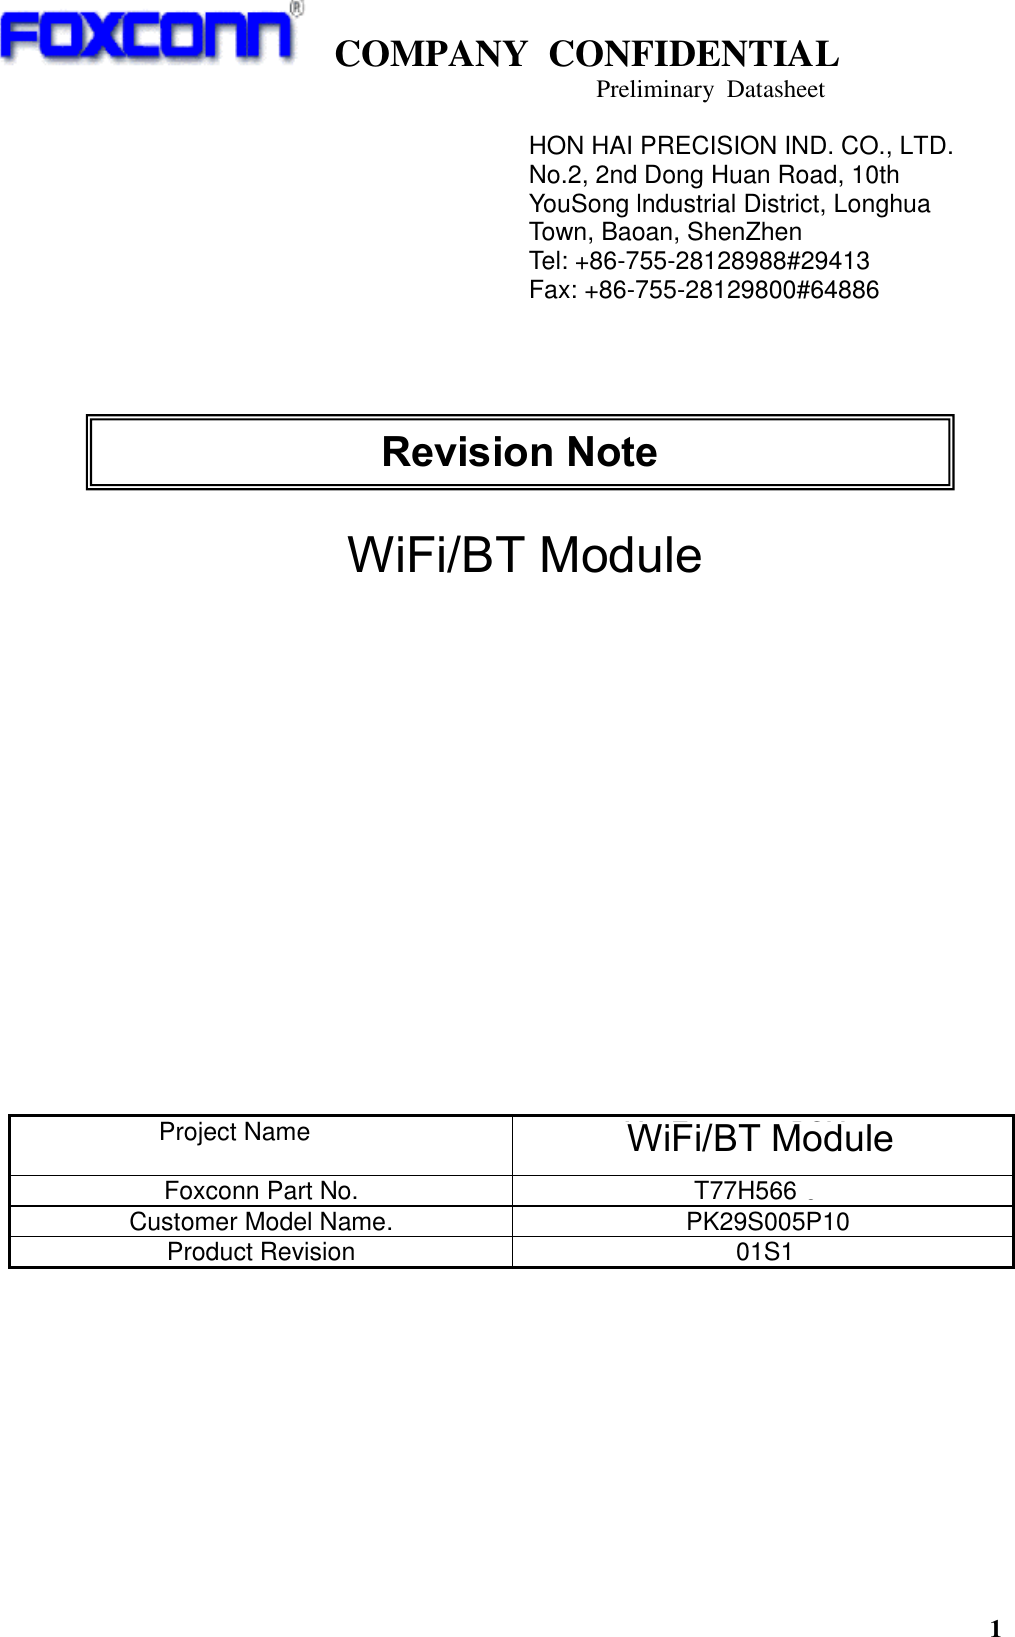   COMPANY  CONFIDENTIAL                                   Preliminary  Datasheet 1                 BCM4356 Dual-Band 2x2 802.11ac and Bluetooth v4.1 Combo Module           Project Name M.2 Type1216 BCM4356     WLAN + BT Combo Module Foxconn Part No. T77H566.01 Customer Model Name.              PK29S005P10 Product Revision                  01S1          HON HAI PRECISION IND. CO., LTD. No.2, 2nd Dong Huan Road, 10th YouSong lndustrial District, Longhua Town, Baoan, ShenZhen Tel: +86-755-28128988#29413    Fax: +86-755-28129800#64886  Revision Note               WiFi/BT Module        WiFi/BT Module 